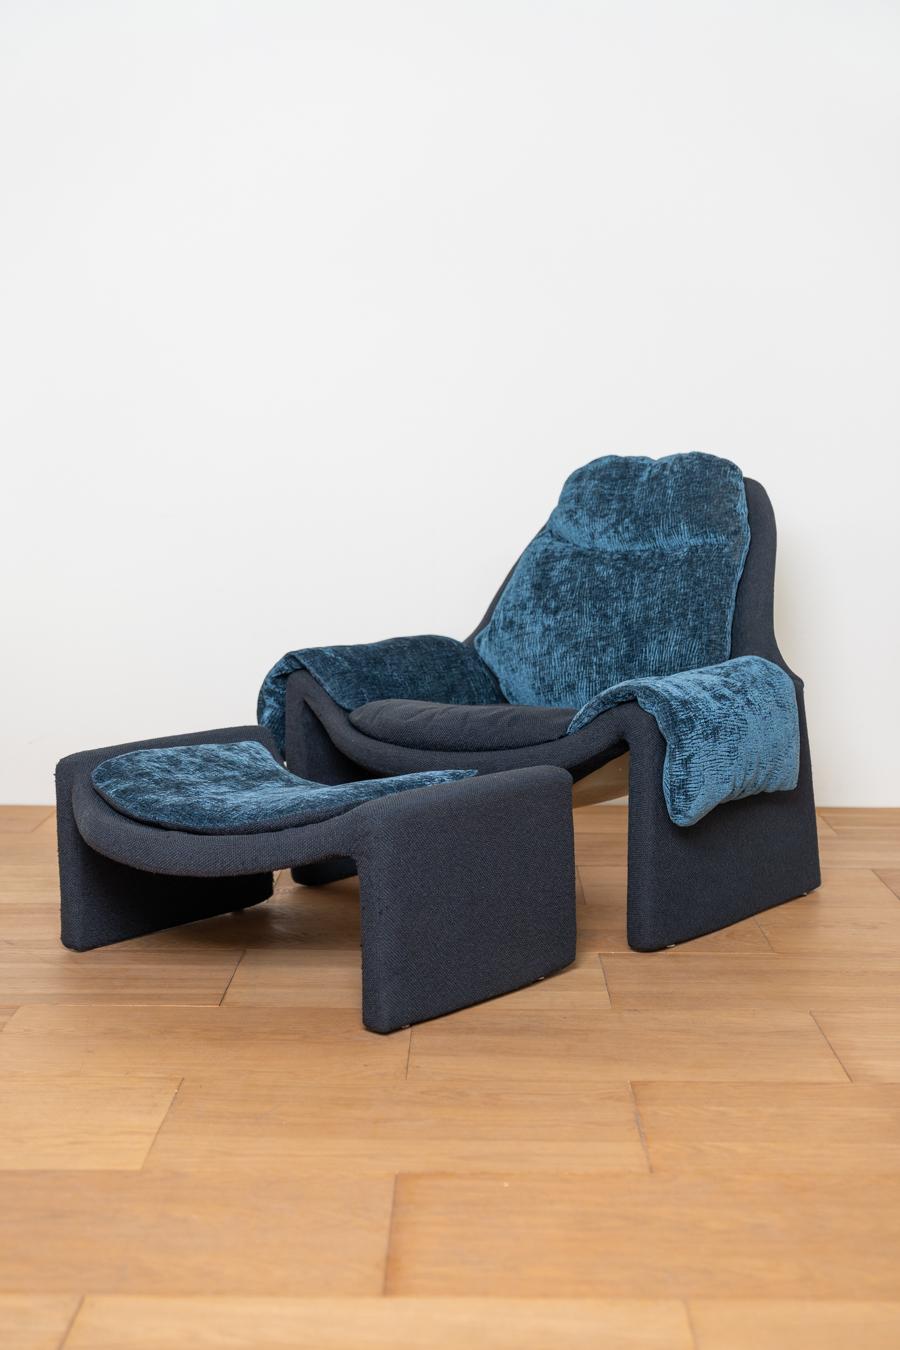 Italian “PROPOSALS” Lounge Chair by Vittorio Introini for Saporiti, 1970s For Sale